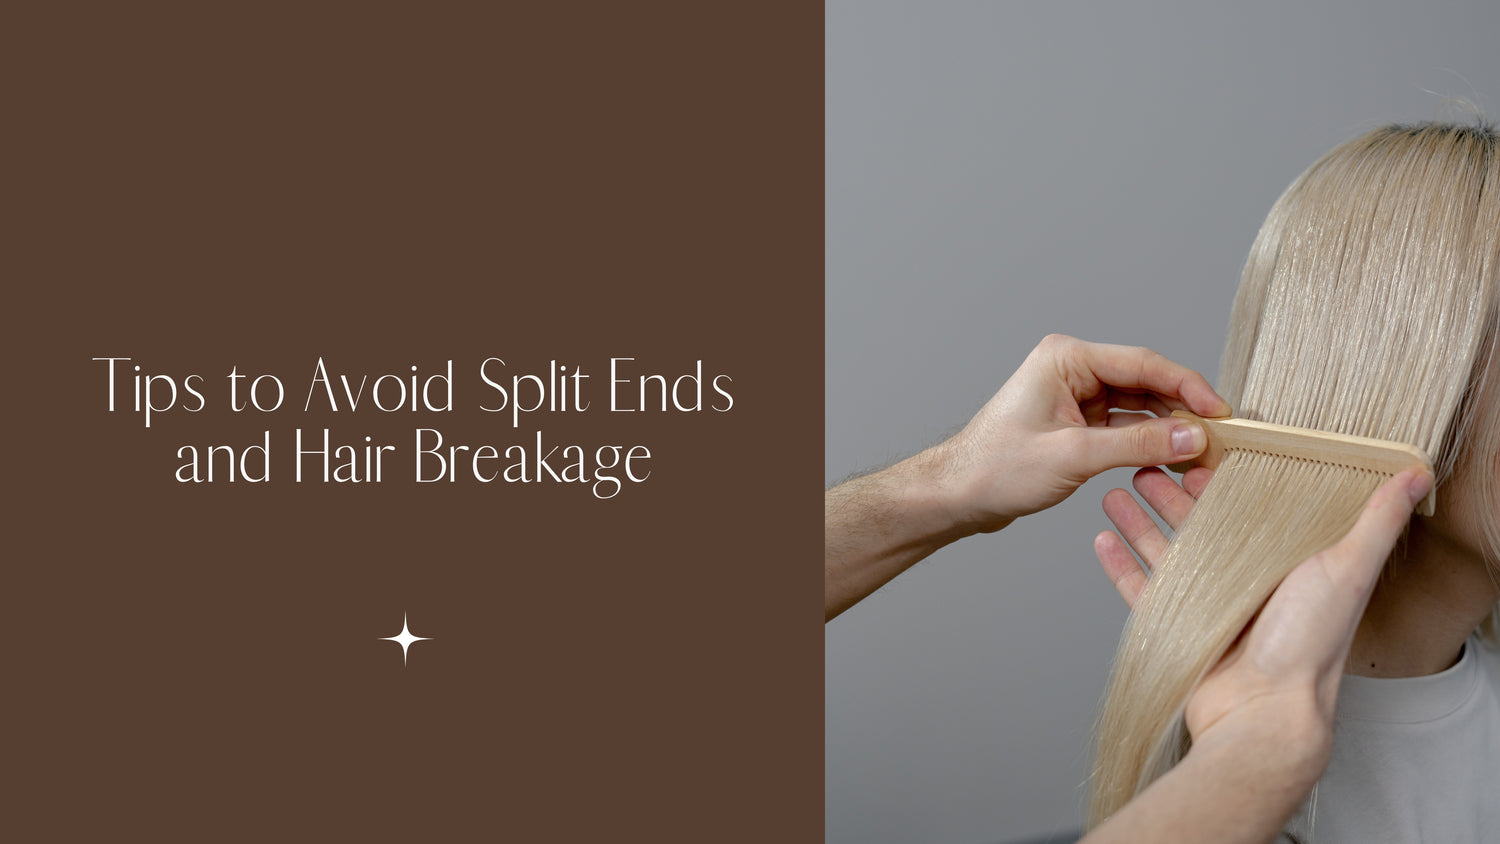 5 TIPS TO AVOID SPLIT ENDS AND HAIR BREAKAGE: SAVE YOUR GORGEOUS LOOKS!